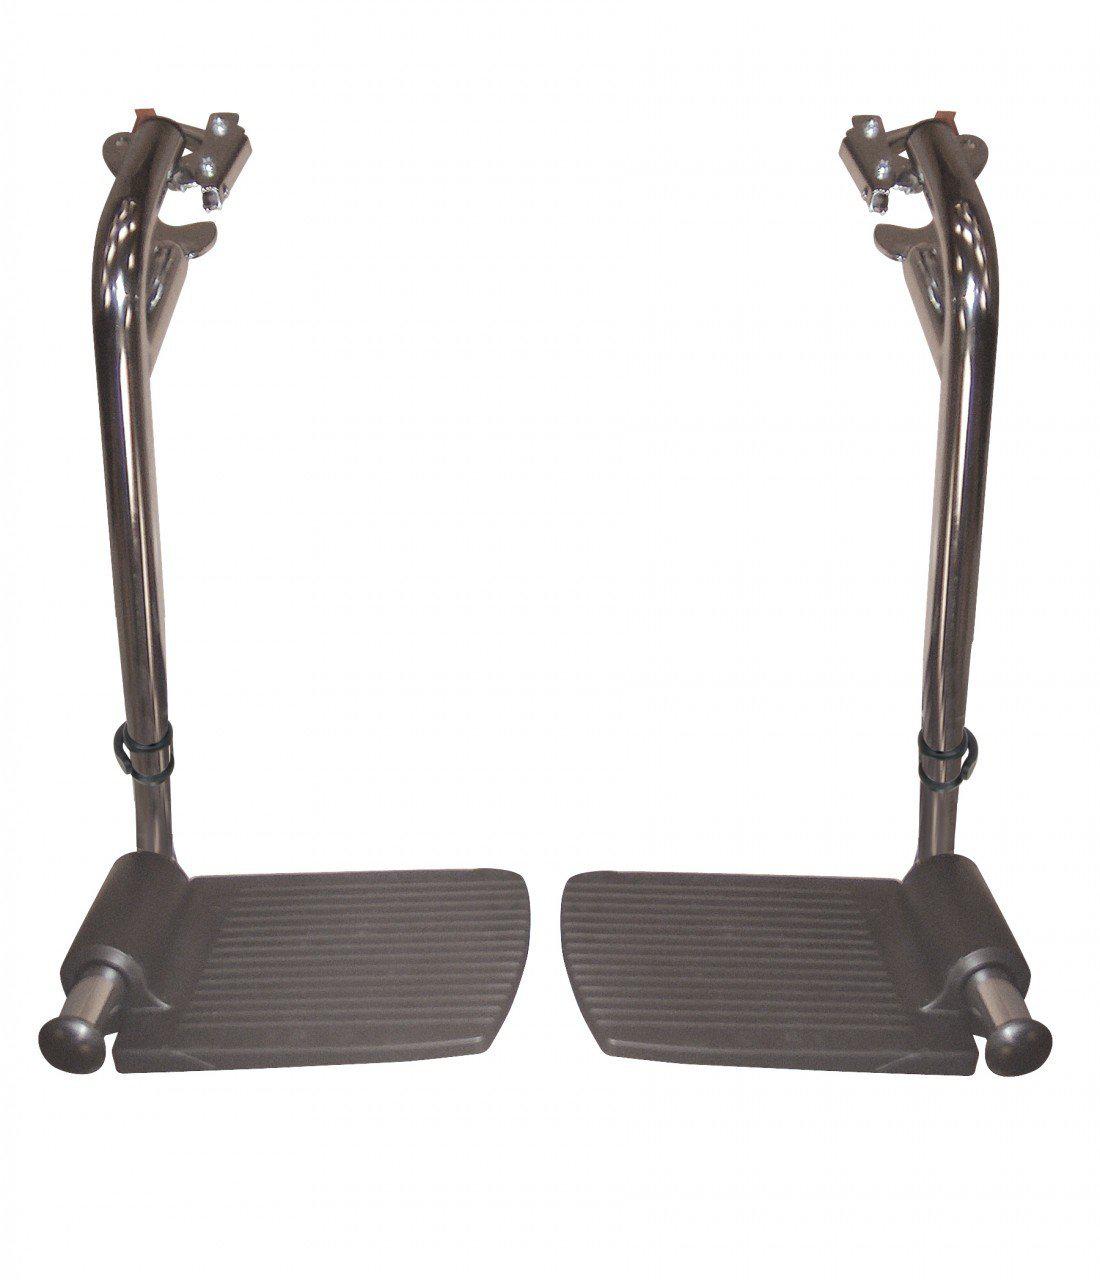 Swing Away Footrests for Sentra EC 16", 18" and 20" Wide Wheelchairs  pstdsf-tf